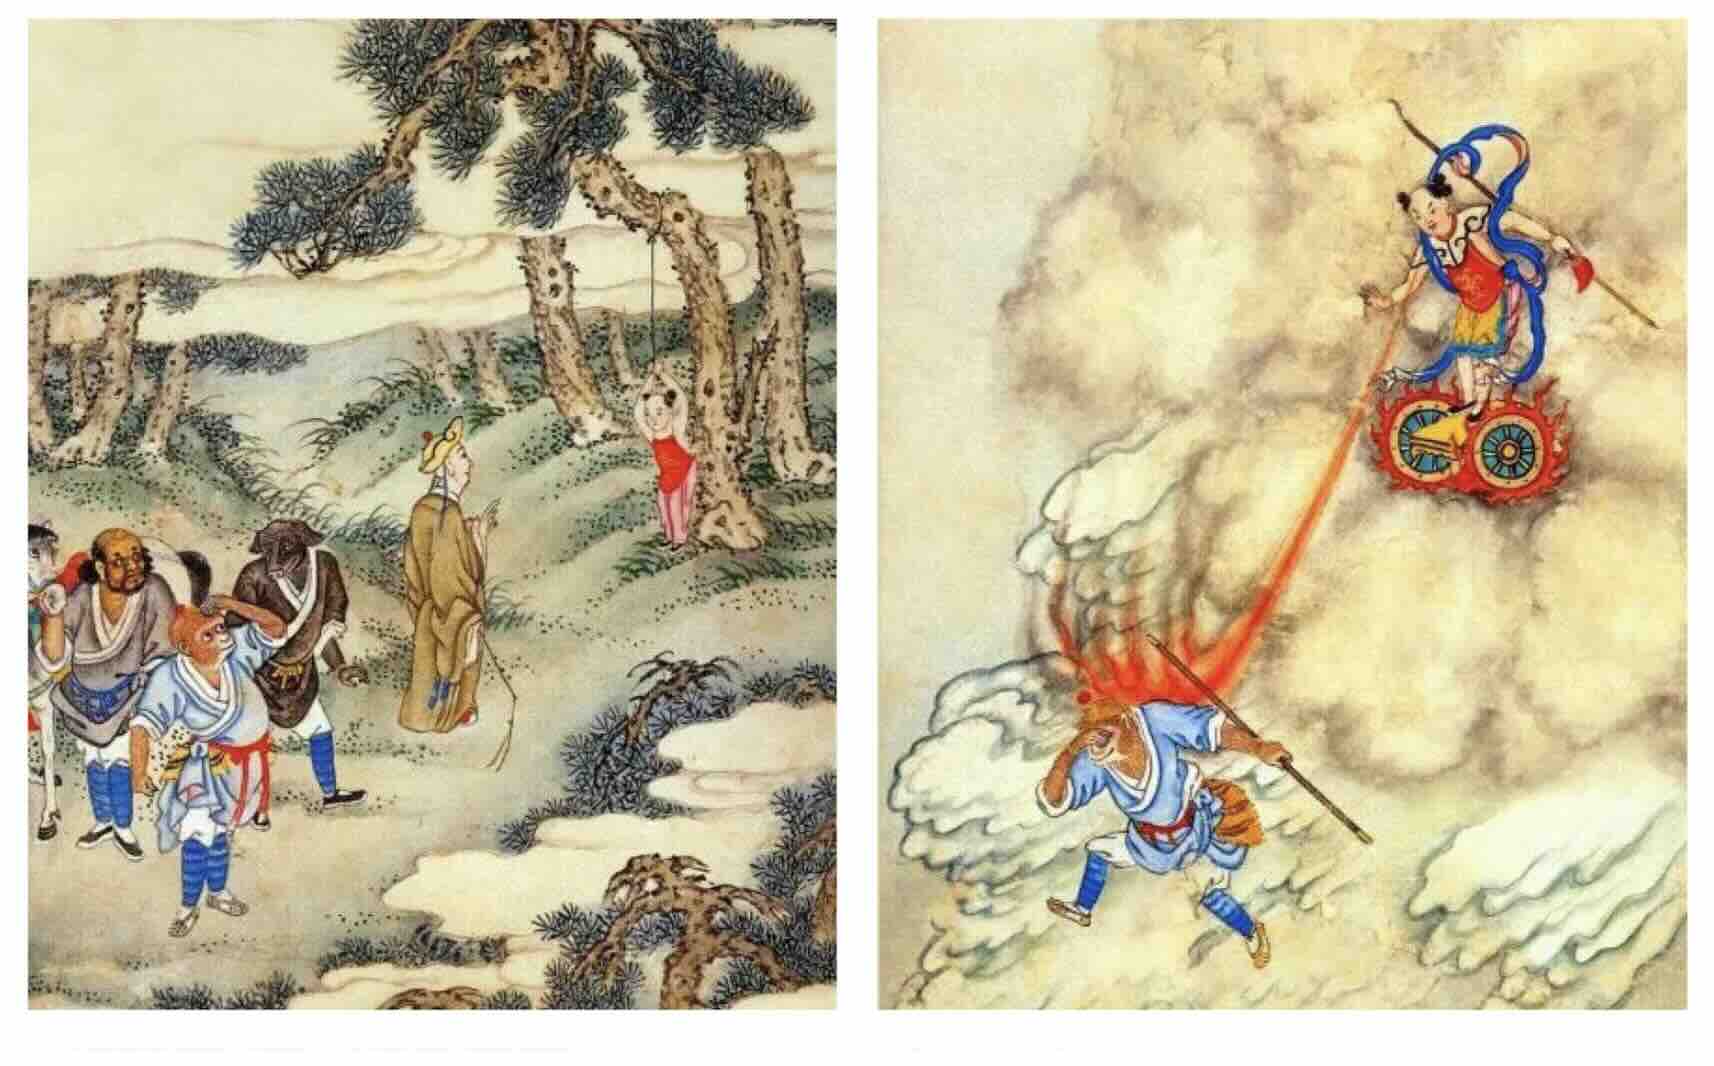 The Ultimate Fight: Red Child Vs. Monkey King